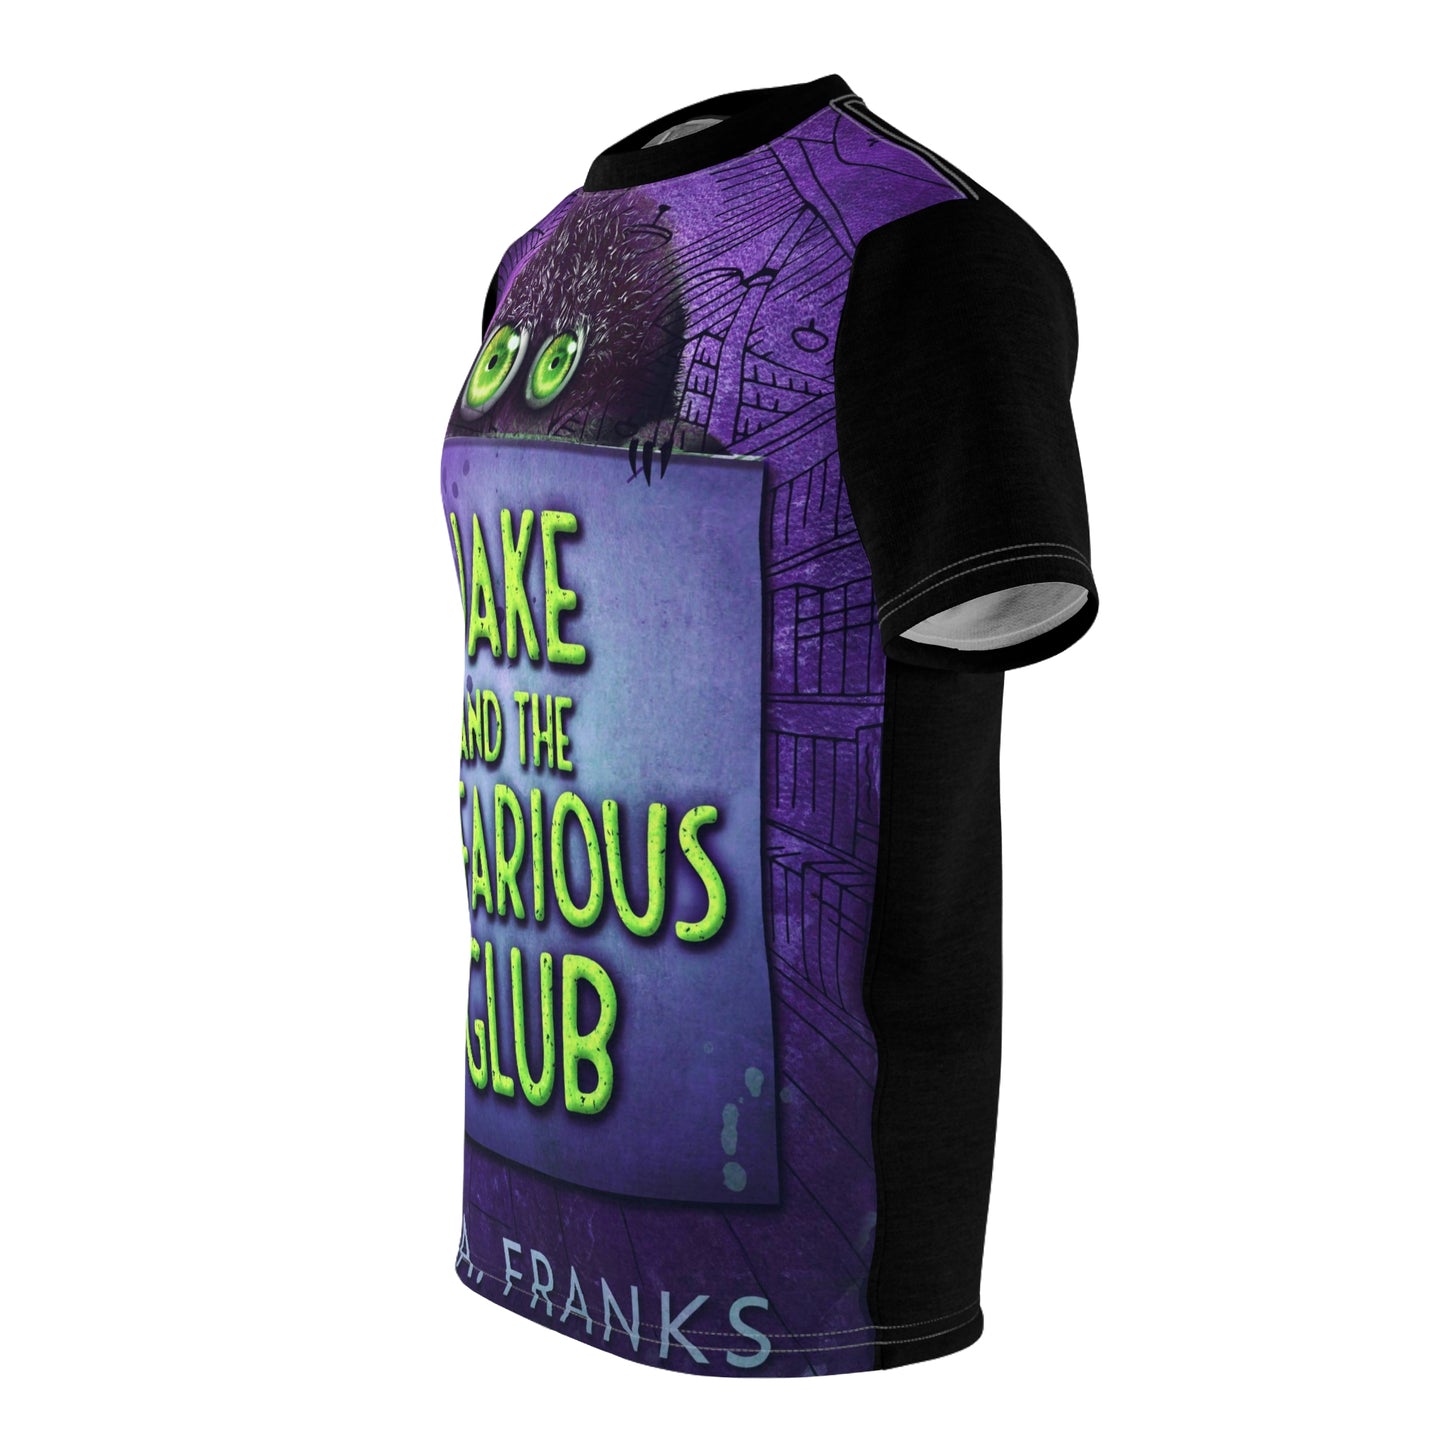 Jake and the Nefarious Glub - Unisex All-Over Print Cut & Sew T-Shirt